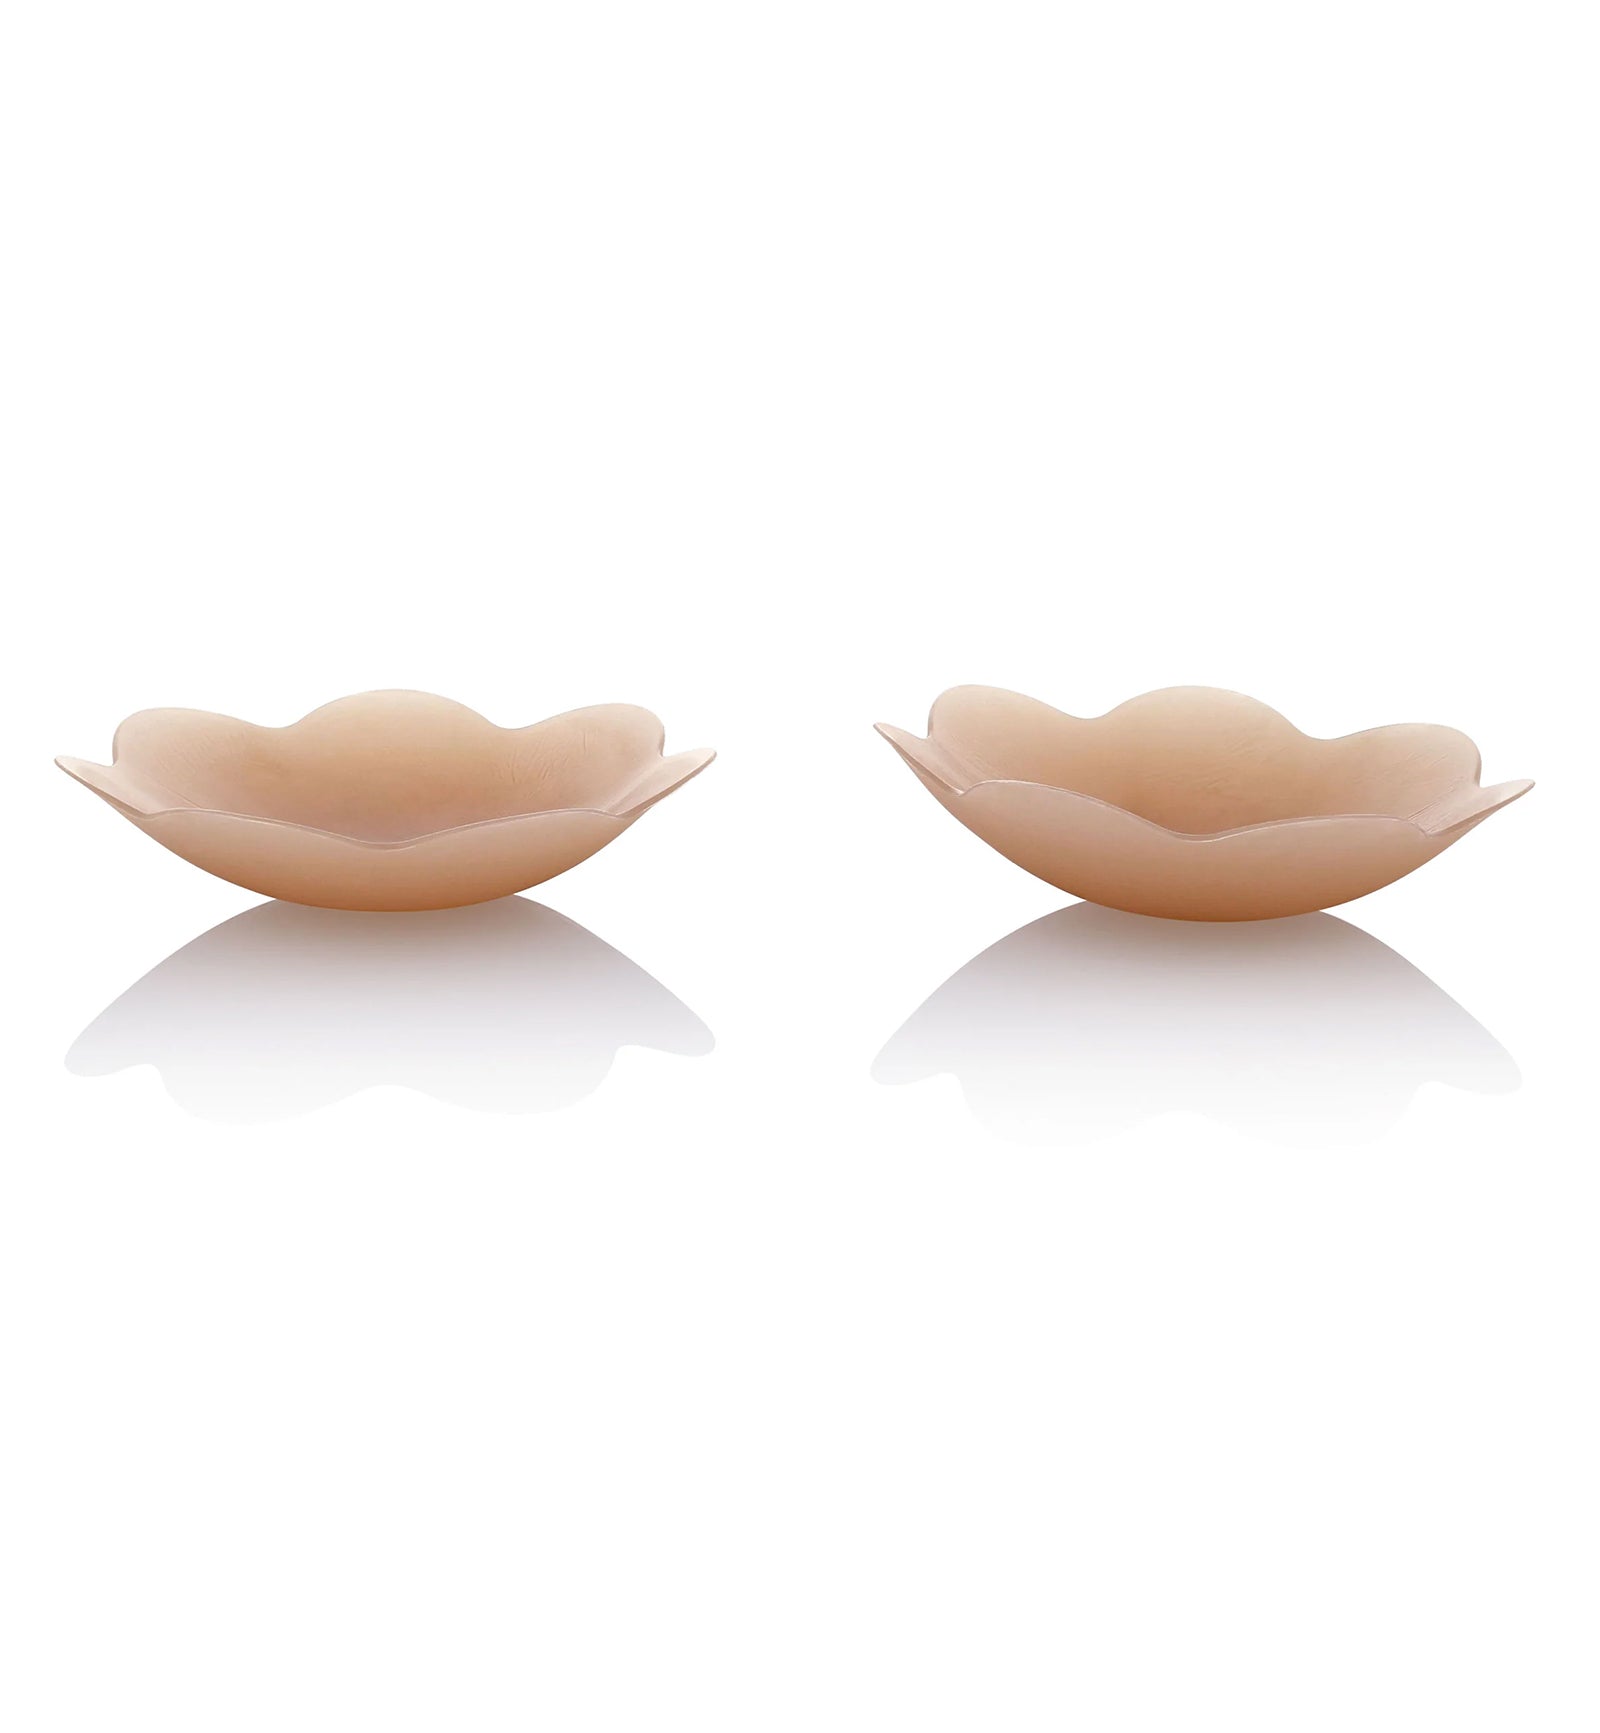 NOOD No-Show Nipple Covers,Nood 7 - Nood 7,One Size